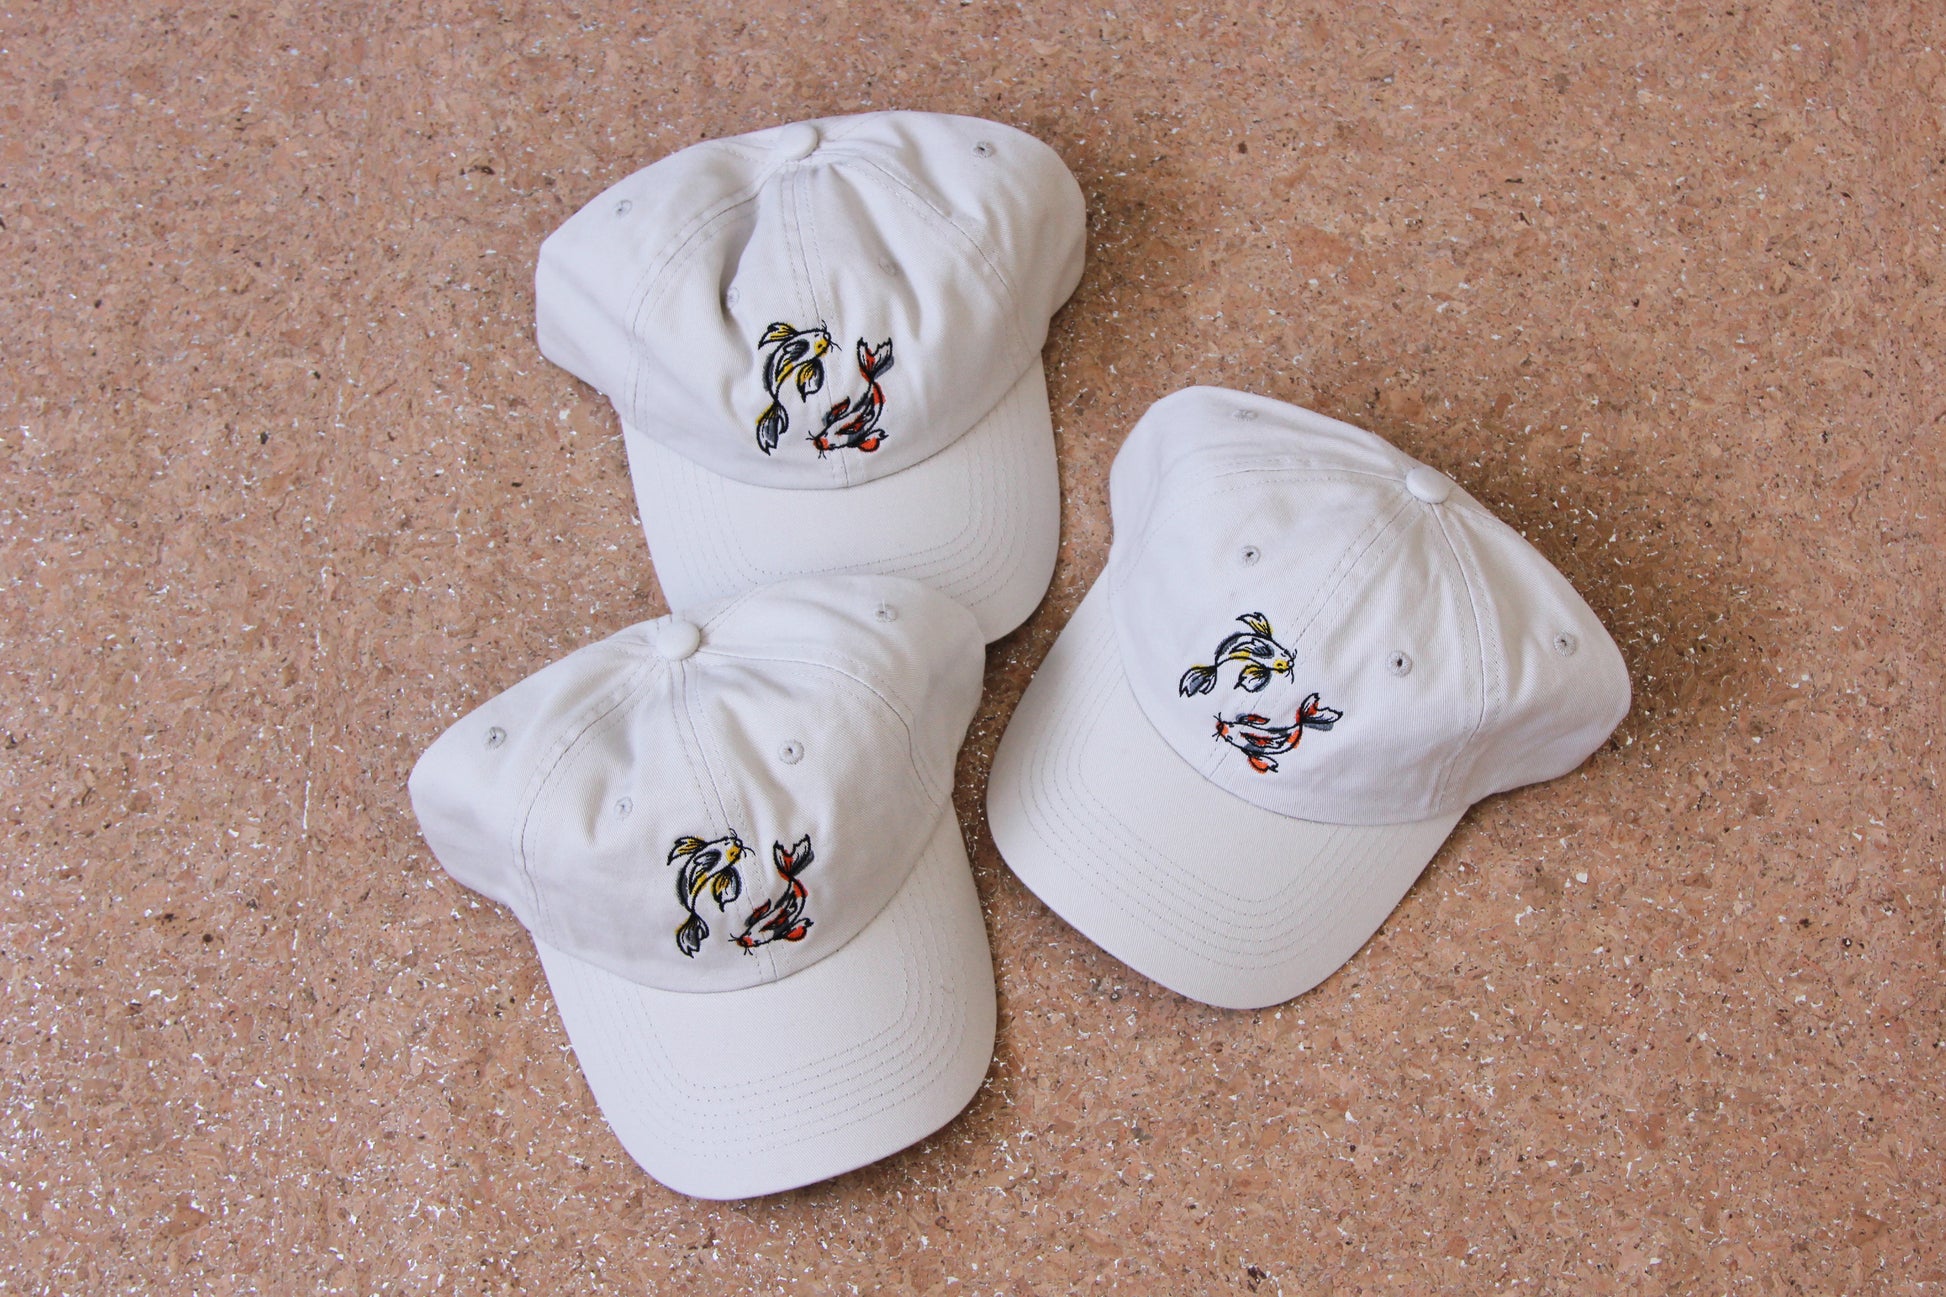 3 cream colored dad hats each with 2 embroidered koi fish circling on a cork background. One koi fish is gold and grey, and the other is scarlet and grey.